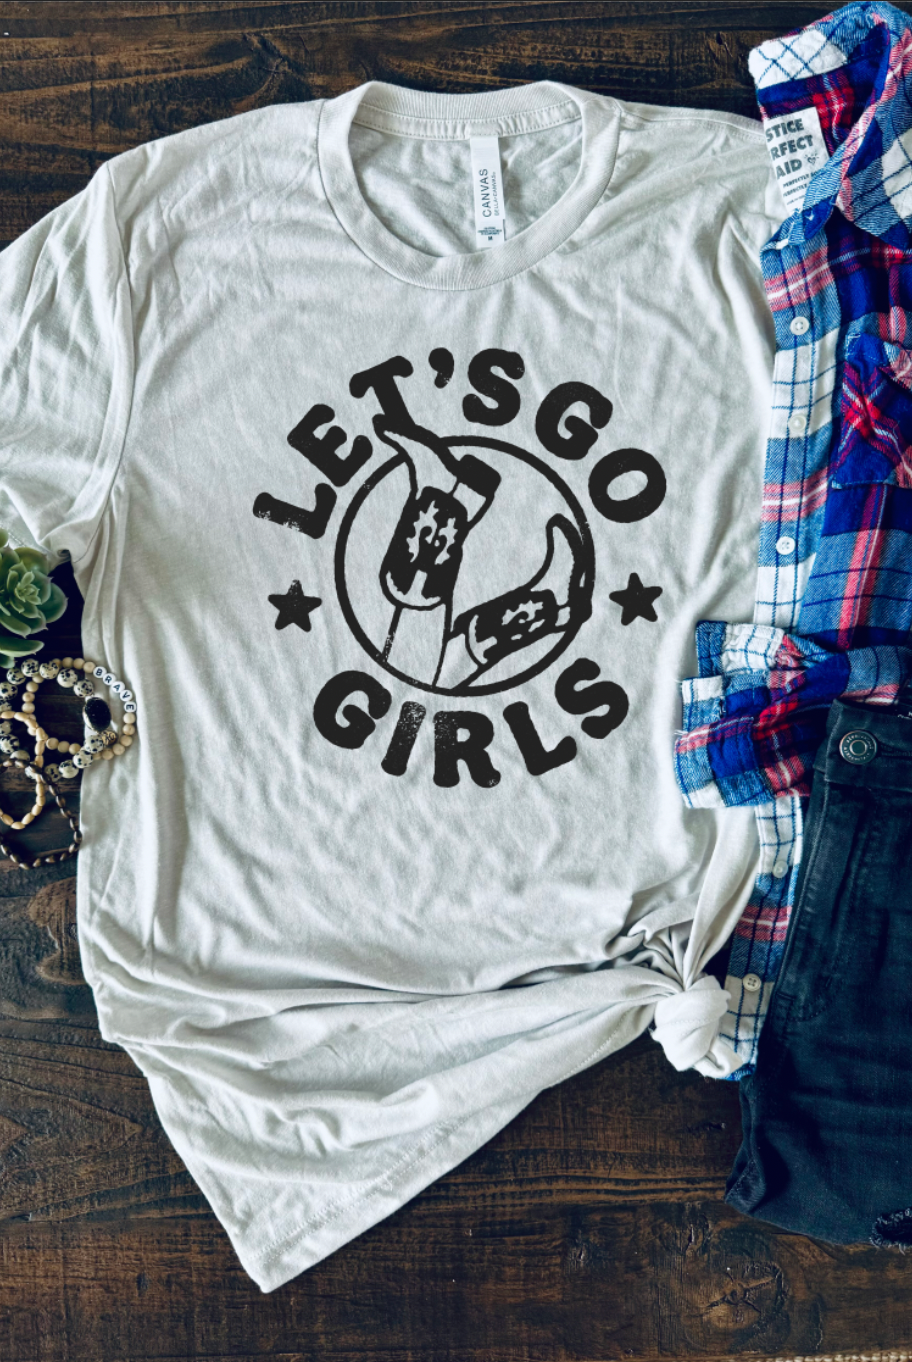 Let's Go Girls, Vintage, Country, Western, Distressed, Bella and Canvas, Hand-made apparel, Shipped from Texas, Cement Unisex Shirt.